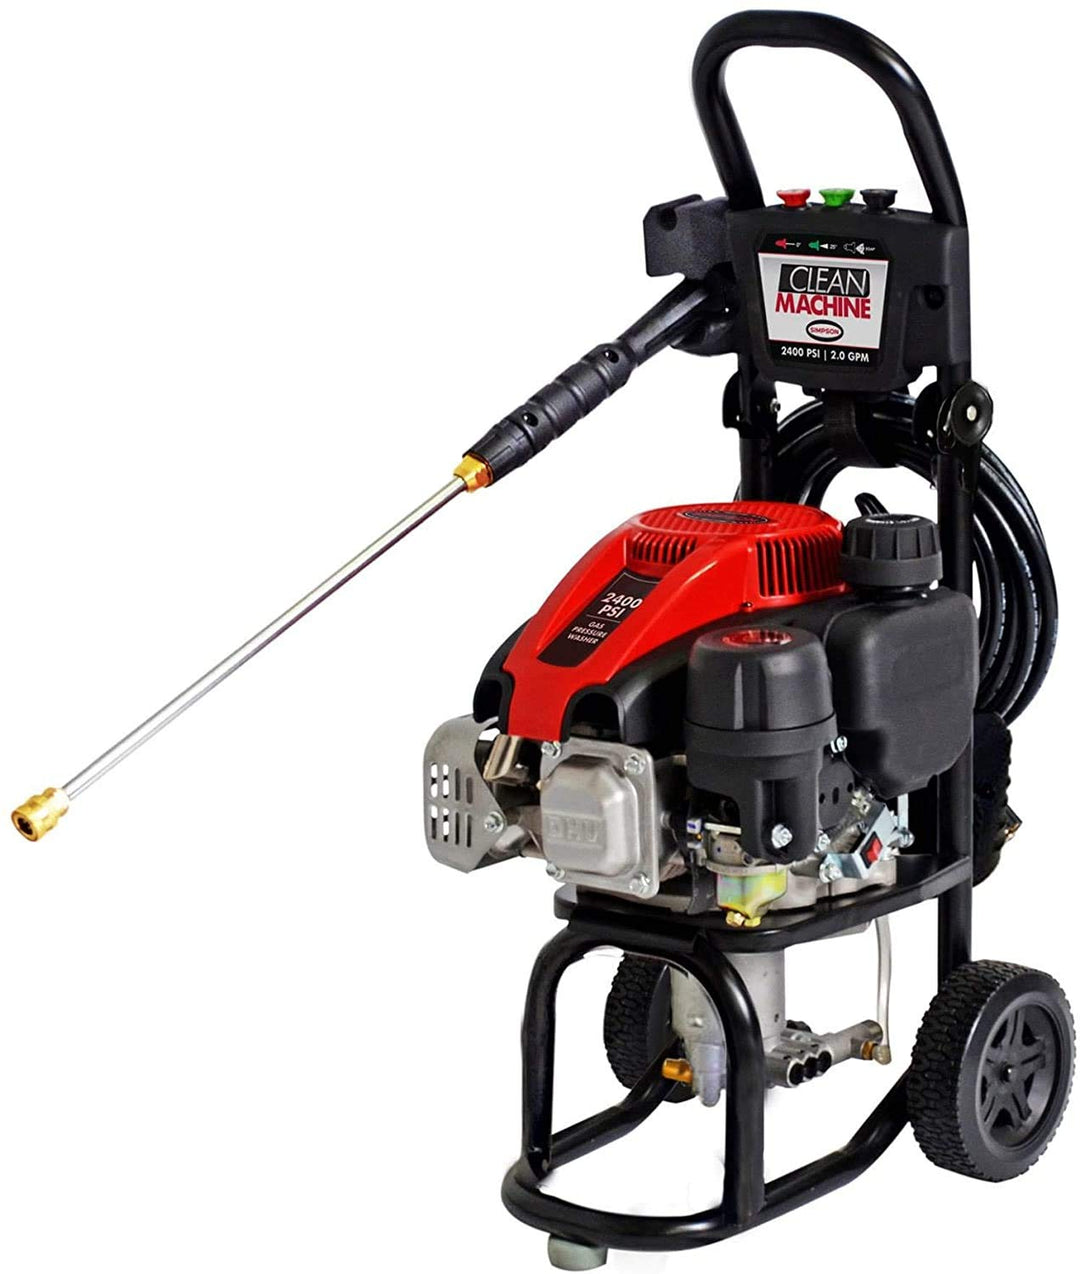 SIMPSON Cleaning CM60912 Clean Machine 2400 PSI Gas Pressure Washer, 2.0 GPM, Simpson Engine, Includes Spray Gun and Wand, 3 QC Nozzle Tips, 1/4-in. x 25-ft. Santoprene Hose [Local Pickup Only]